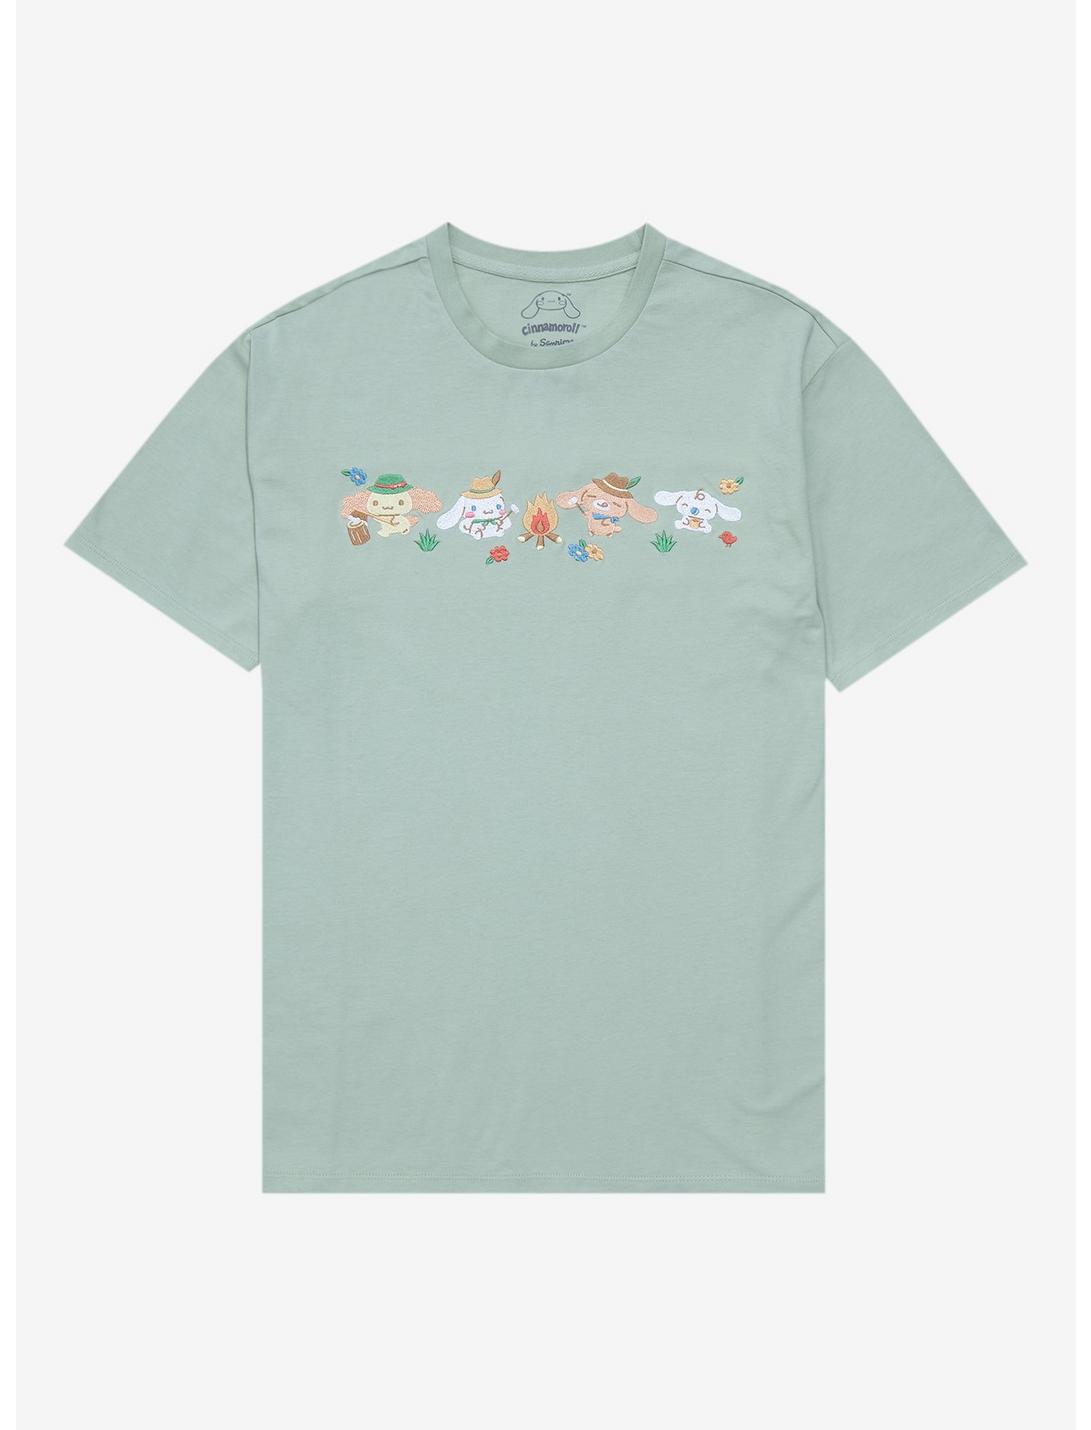 Sanrio Cinnamoroll Camping Group Portrait T-Shirt - BoxLunch Exclusive, SAGE, hi-res